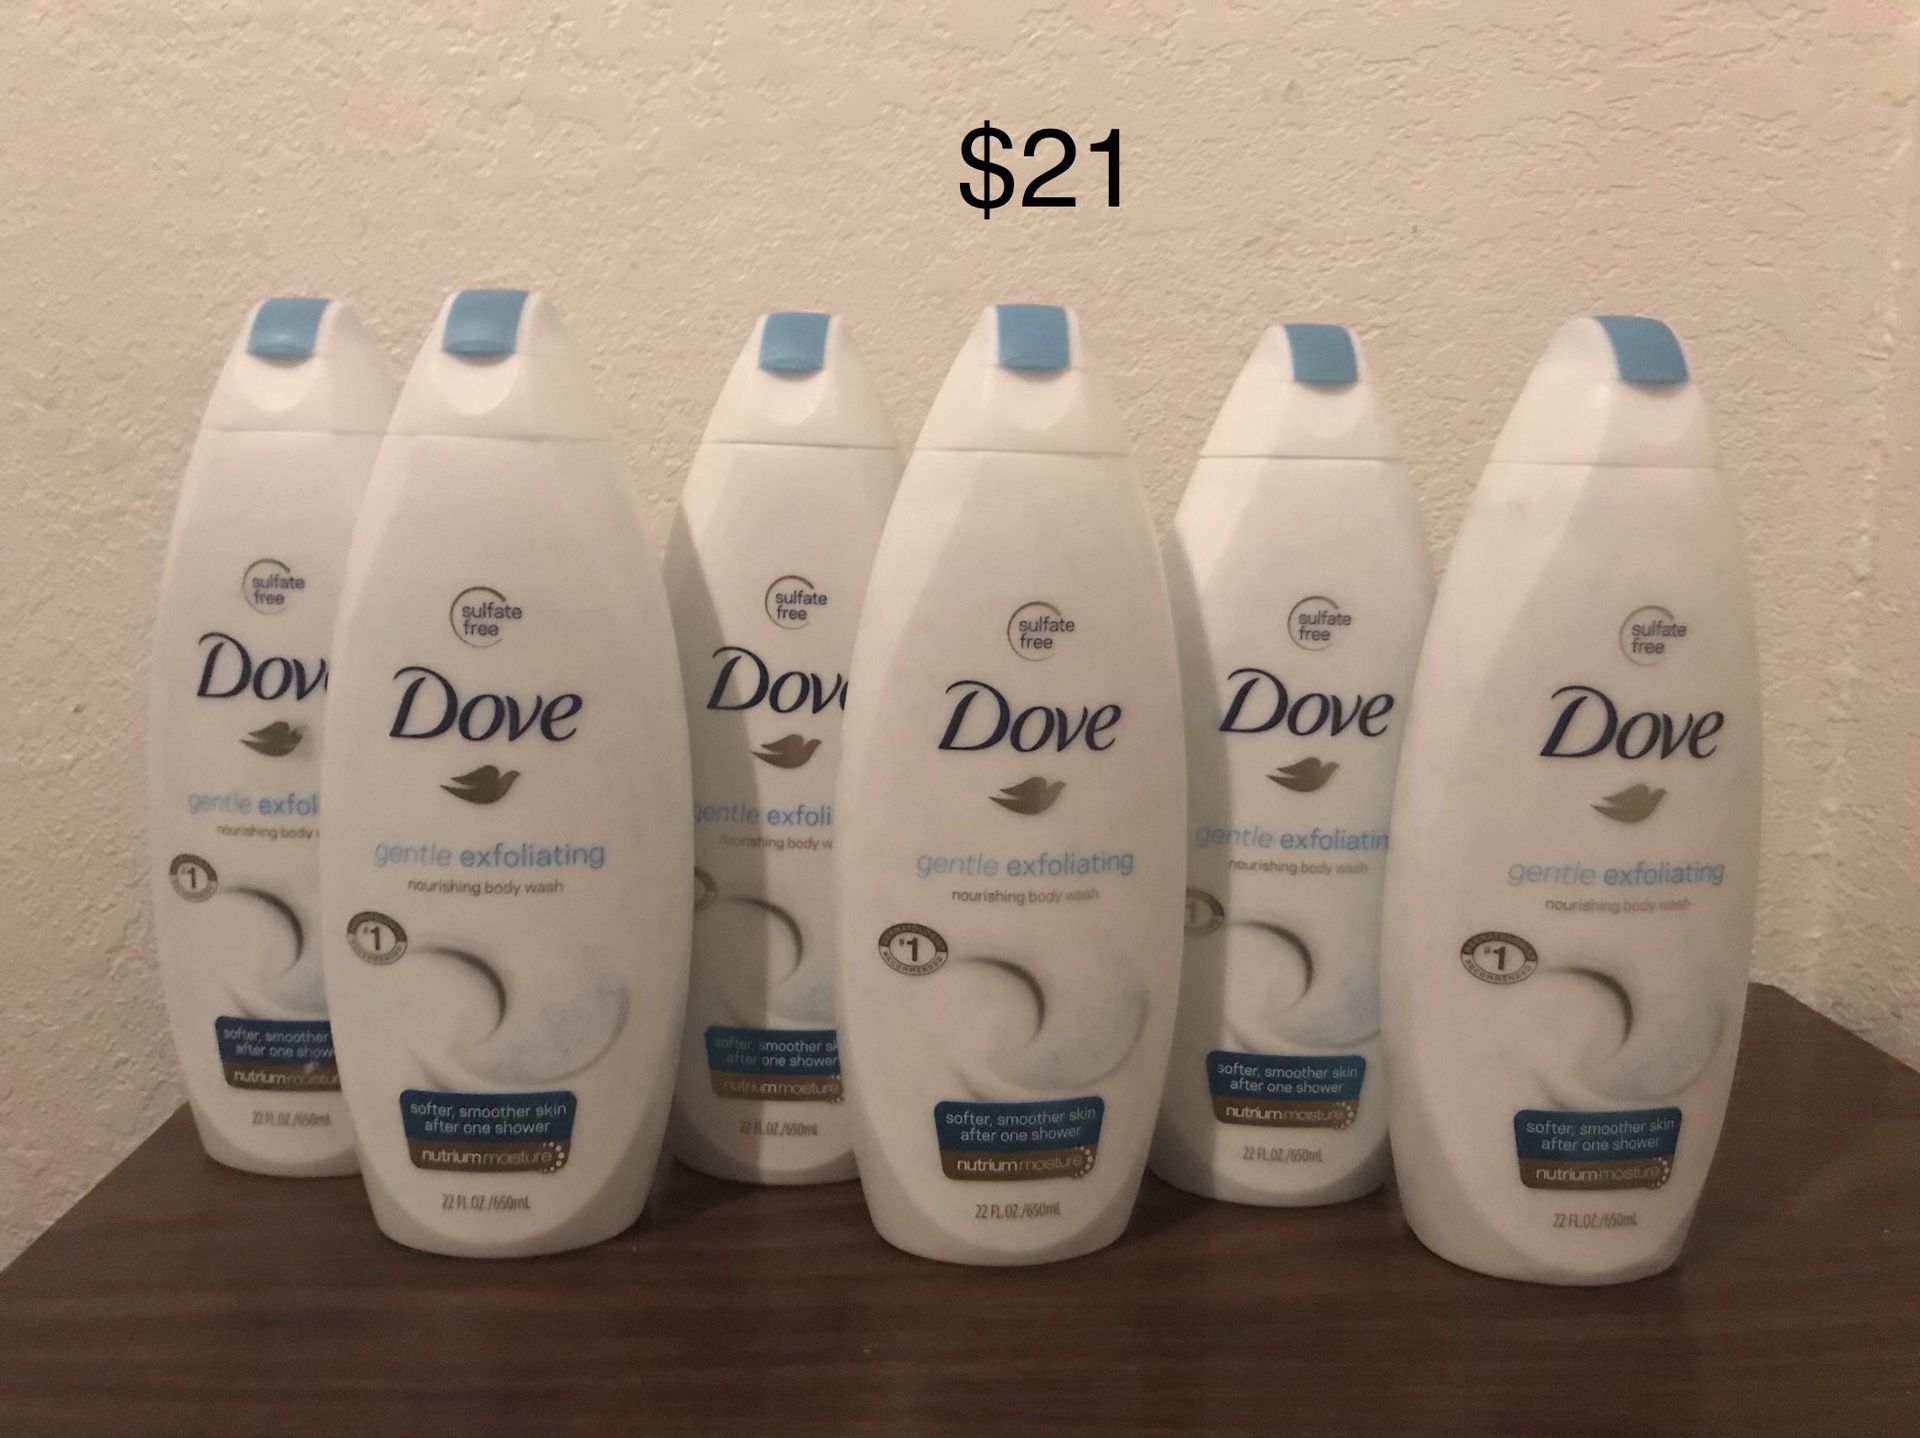 Dove, Caress, Old Spice, Axe